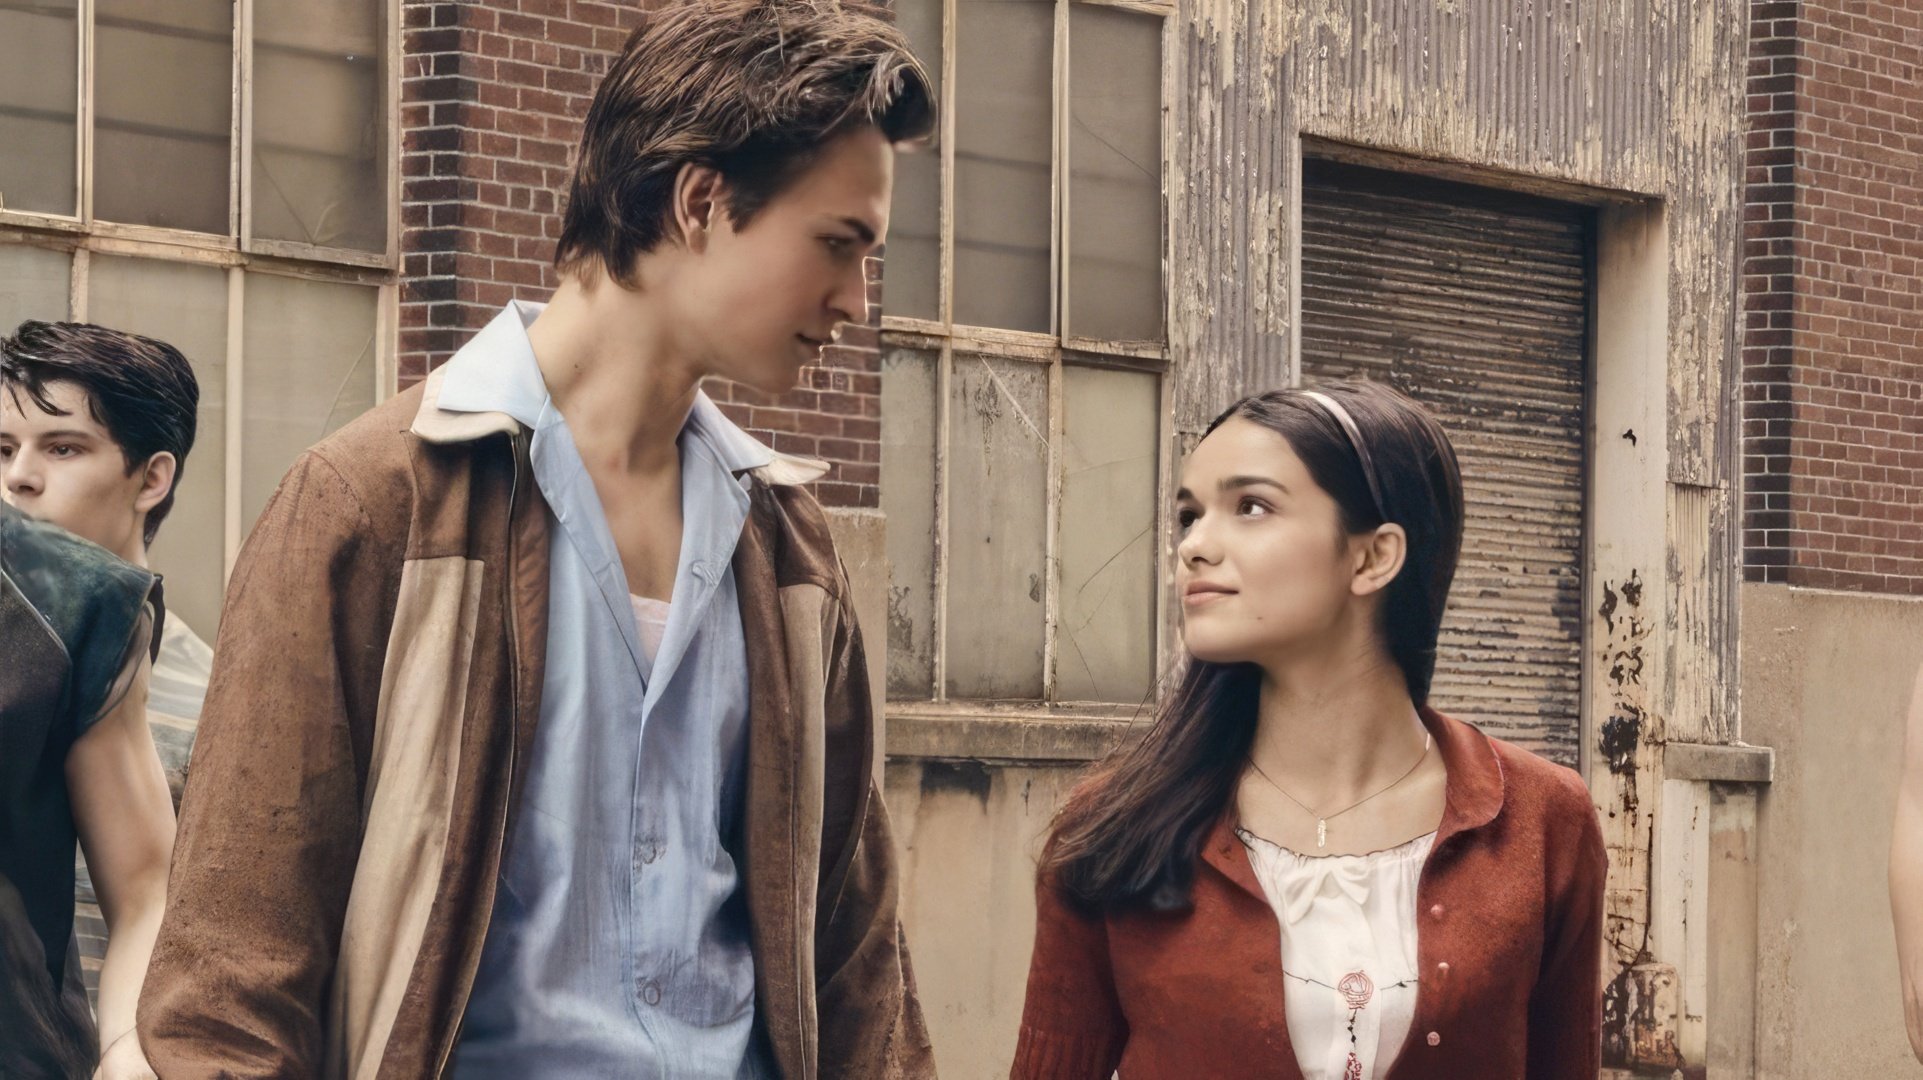 A screencap from West Side Story trailer